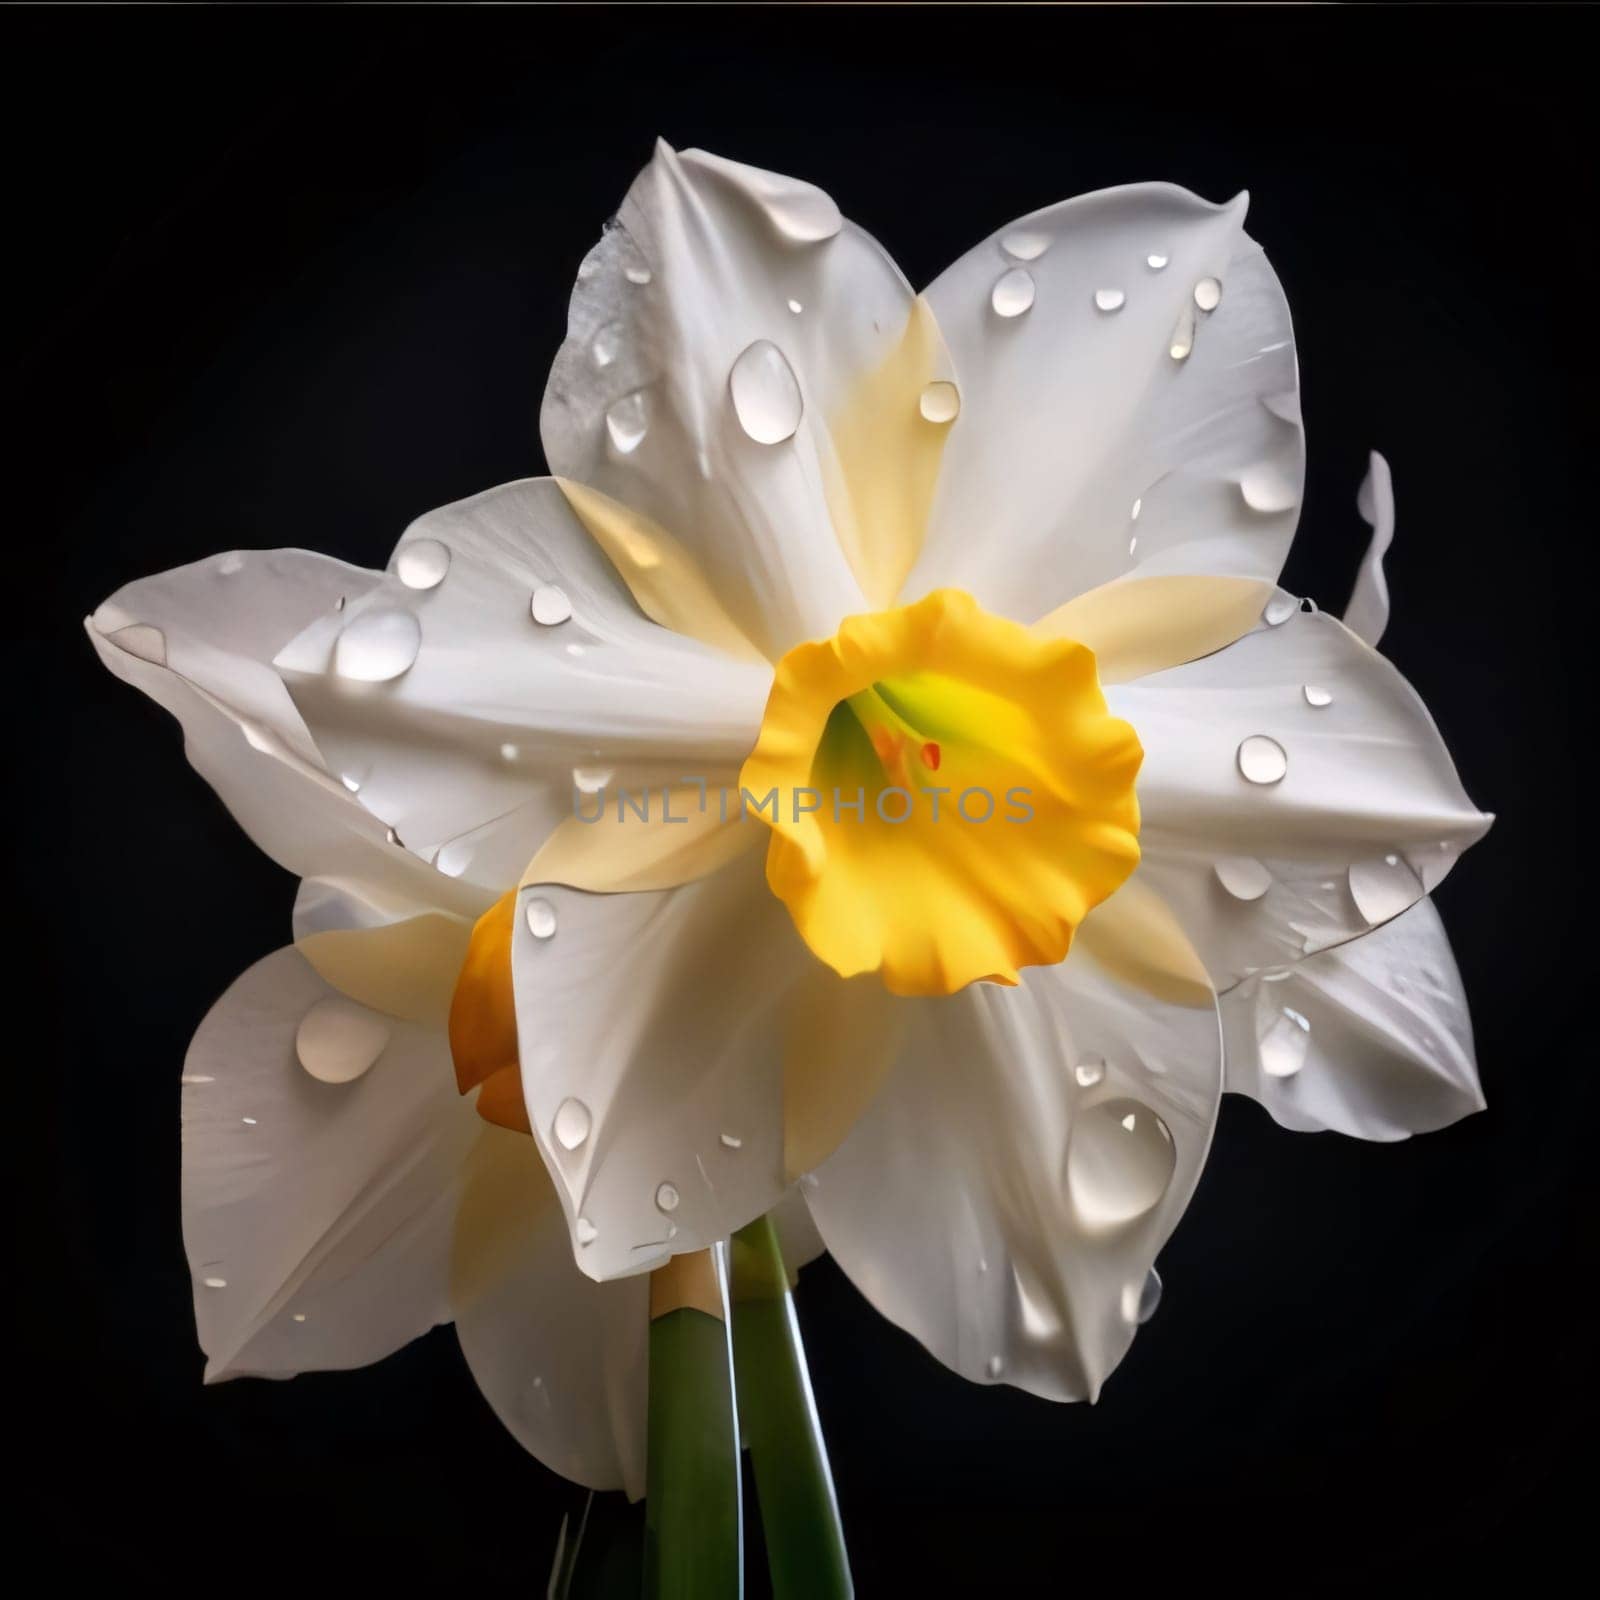 White daffodil flower isolated on black background. Flowering flowers, a symbol of spring, new life. by ThemesS